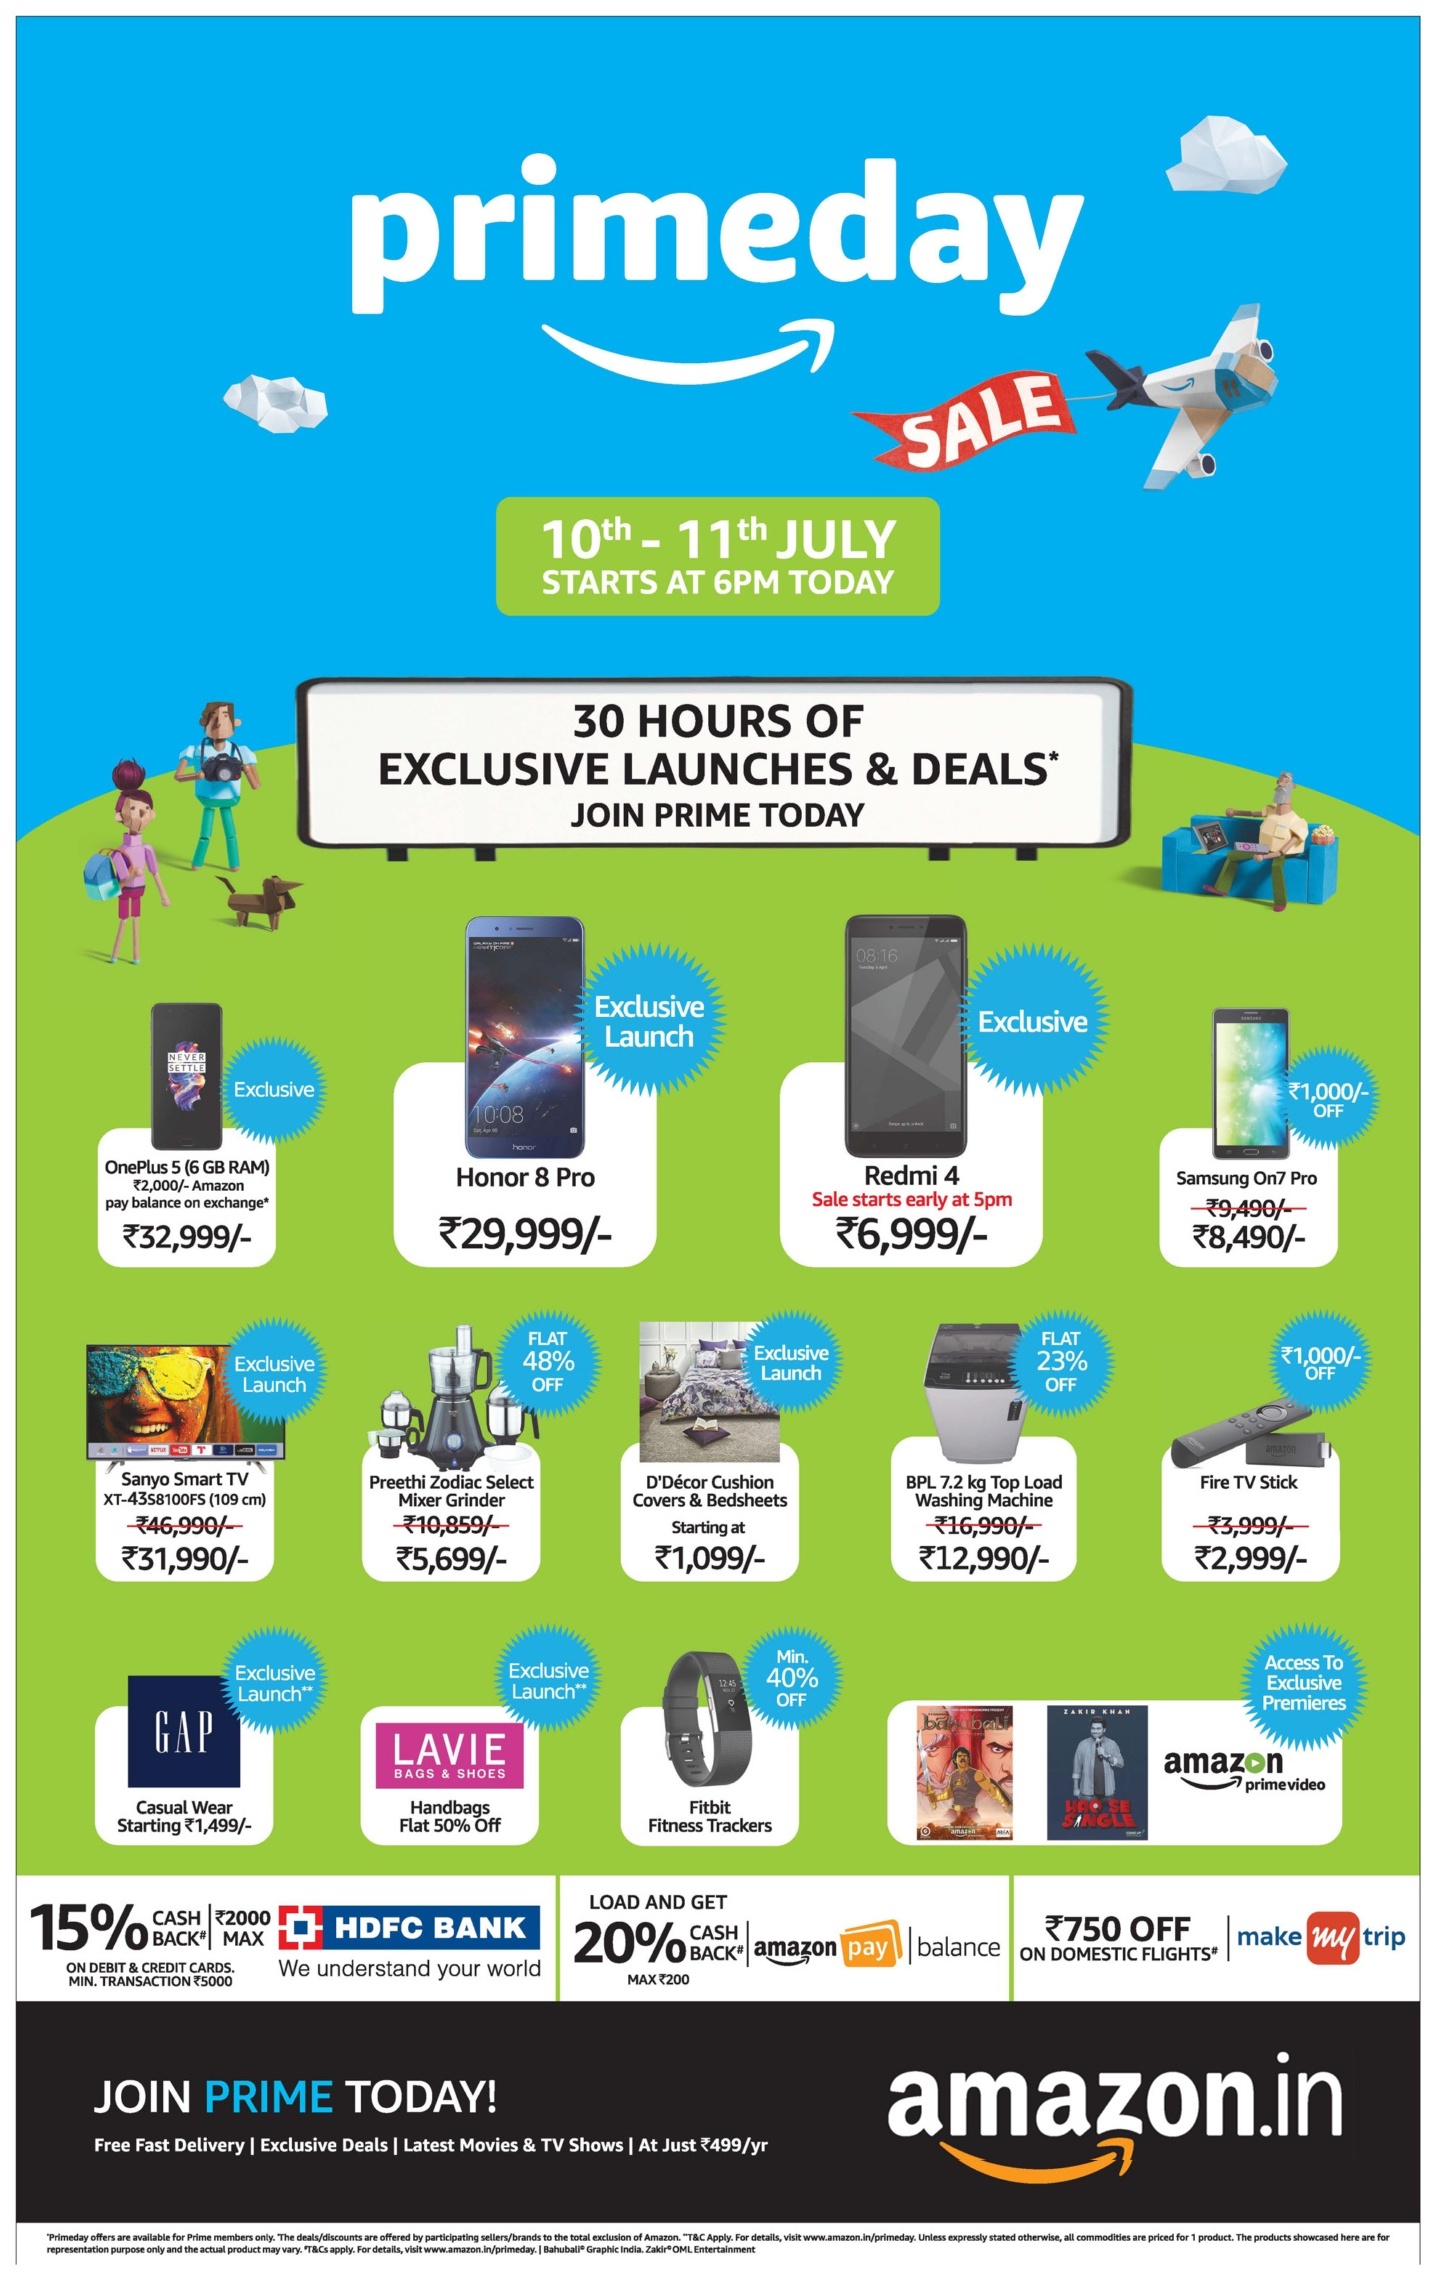 Prime Day Sale 30 Hours of Exclusive Launches & Deals Ad - Advert  Gallery